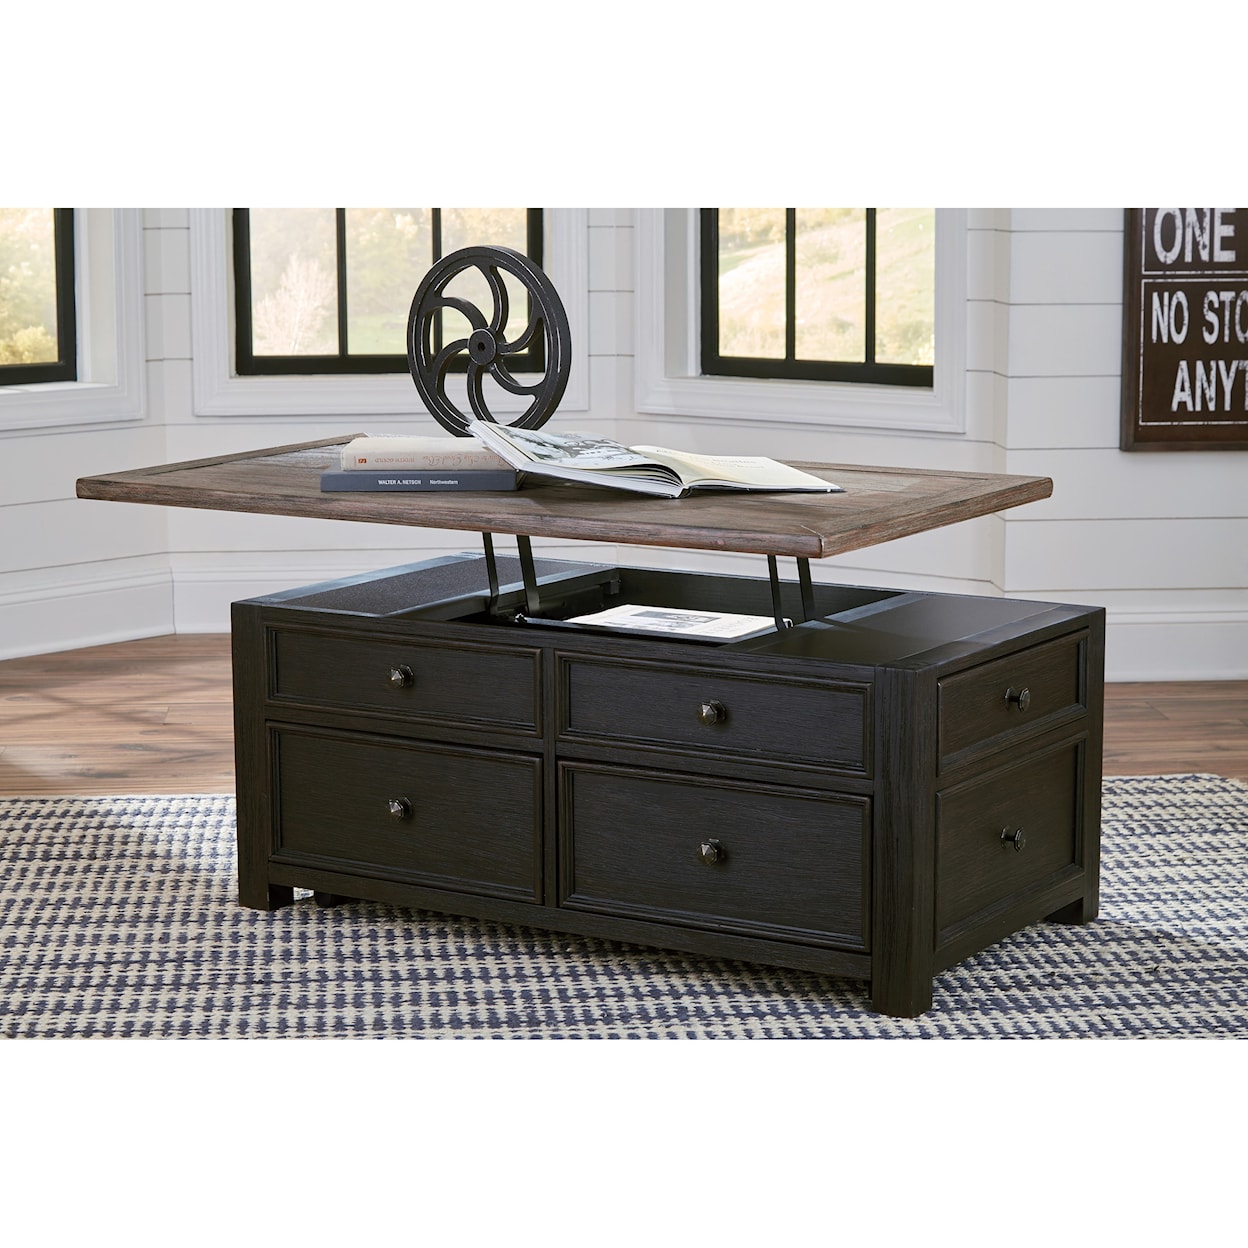 Ashley Furniture Signature Design Tyler Creek Lift Top Cocktail Table